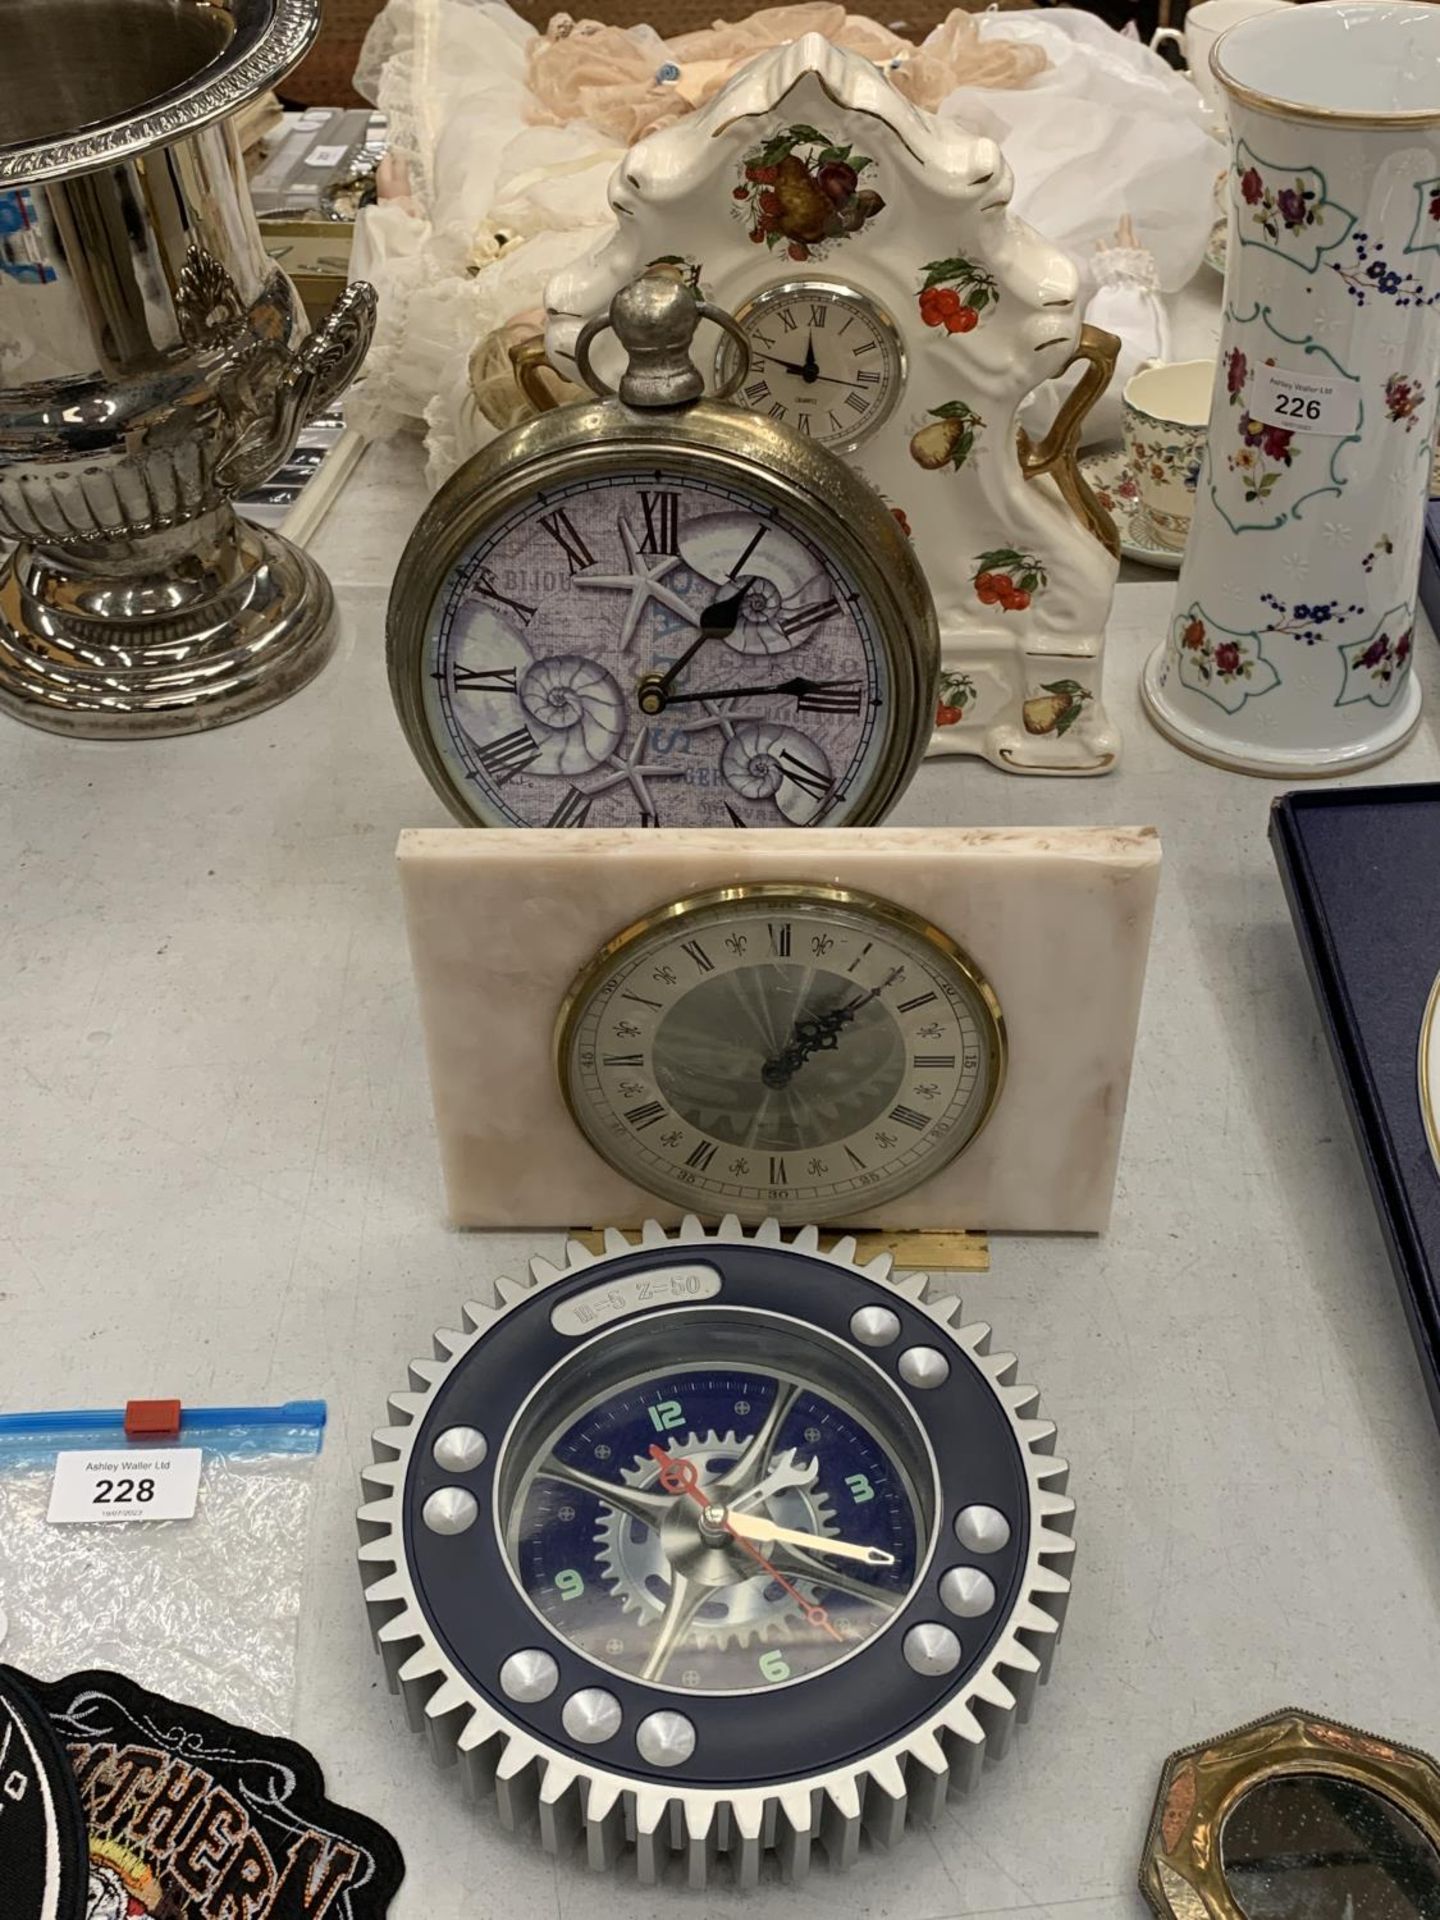 A BATTERY OPERATED CLOCK IN THE FORM OF A POCKET WATCH, WESTCLOX MANTLE CLOCK FAUX MARBLE ,